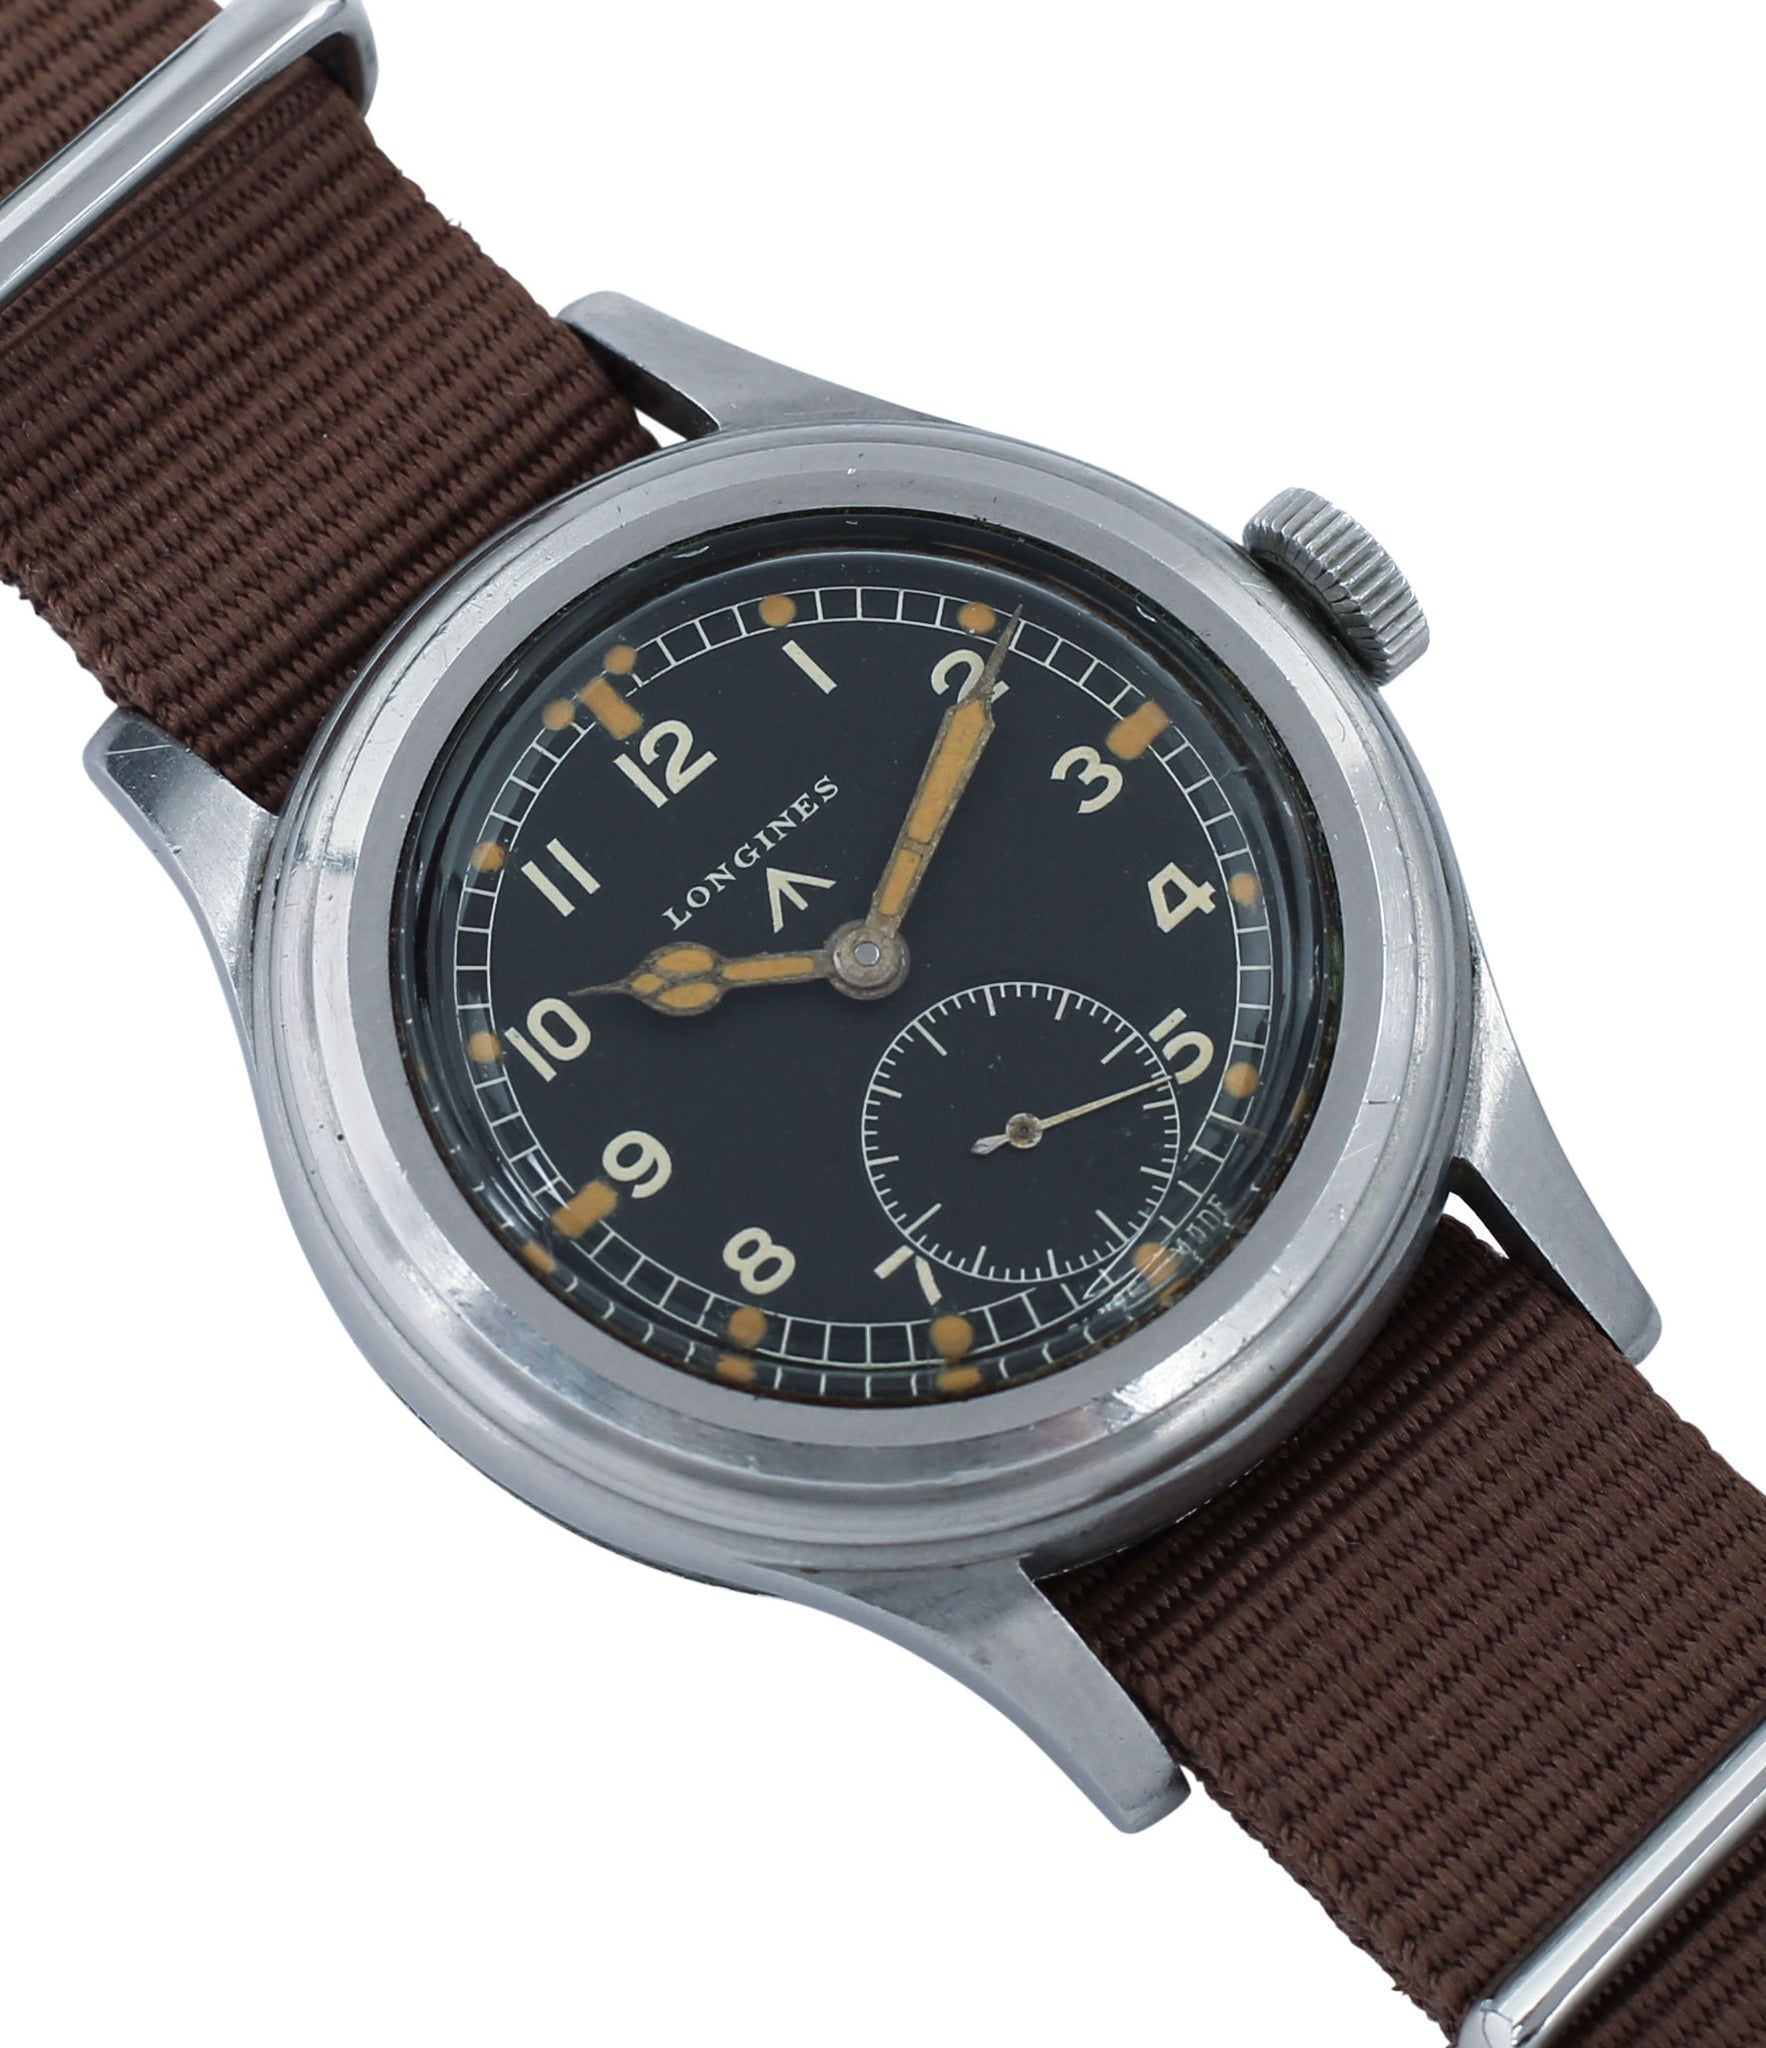 buy vintage Longines W.W.W. Dirty Dozen British military MoD steel chronometer-graded watch for sale online at A Collected Man London vintage military watch specialist